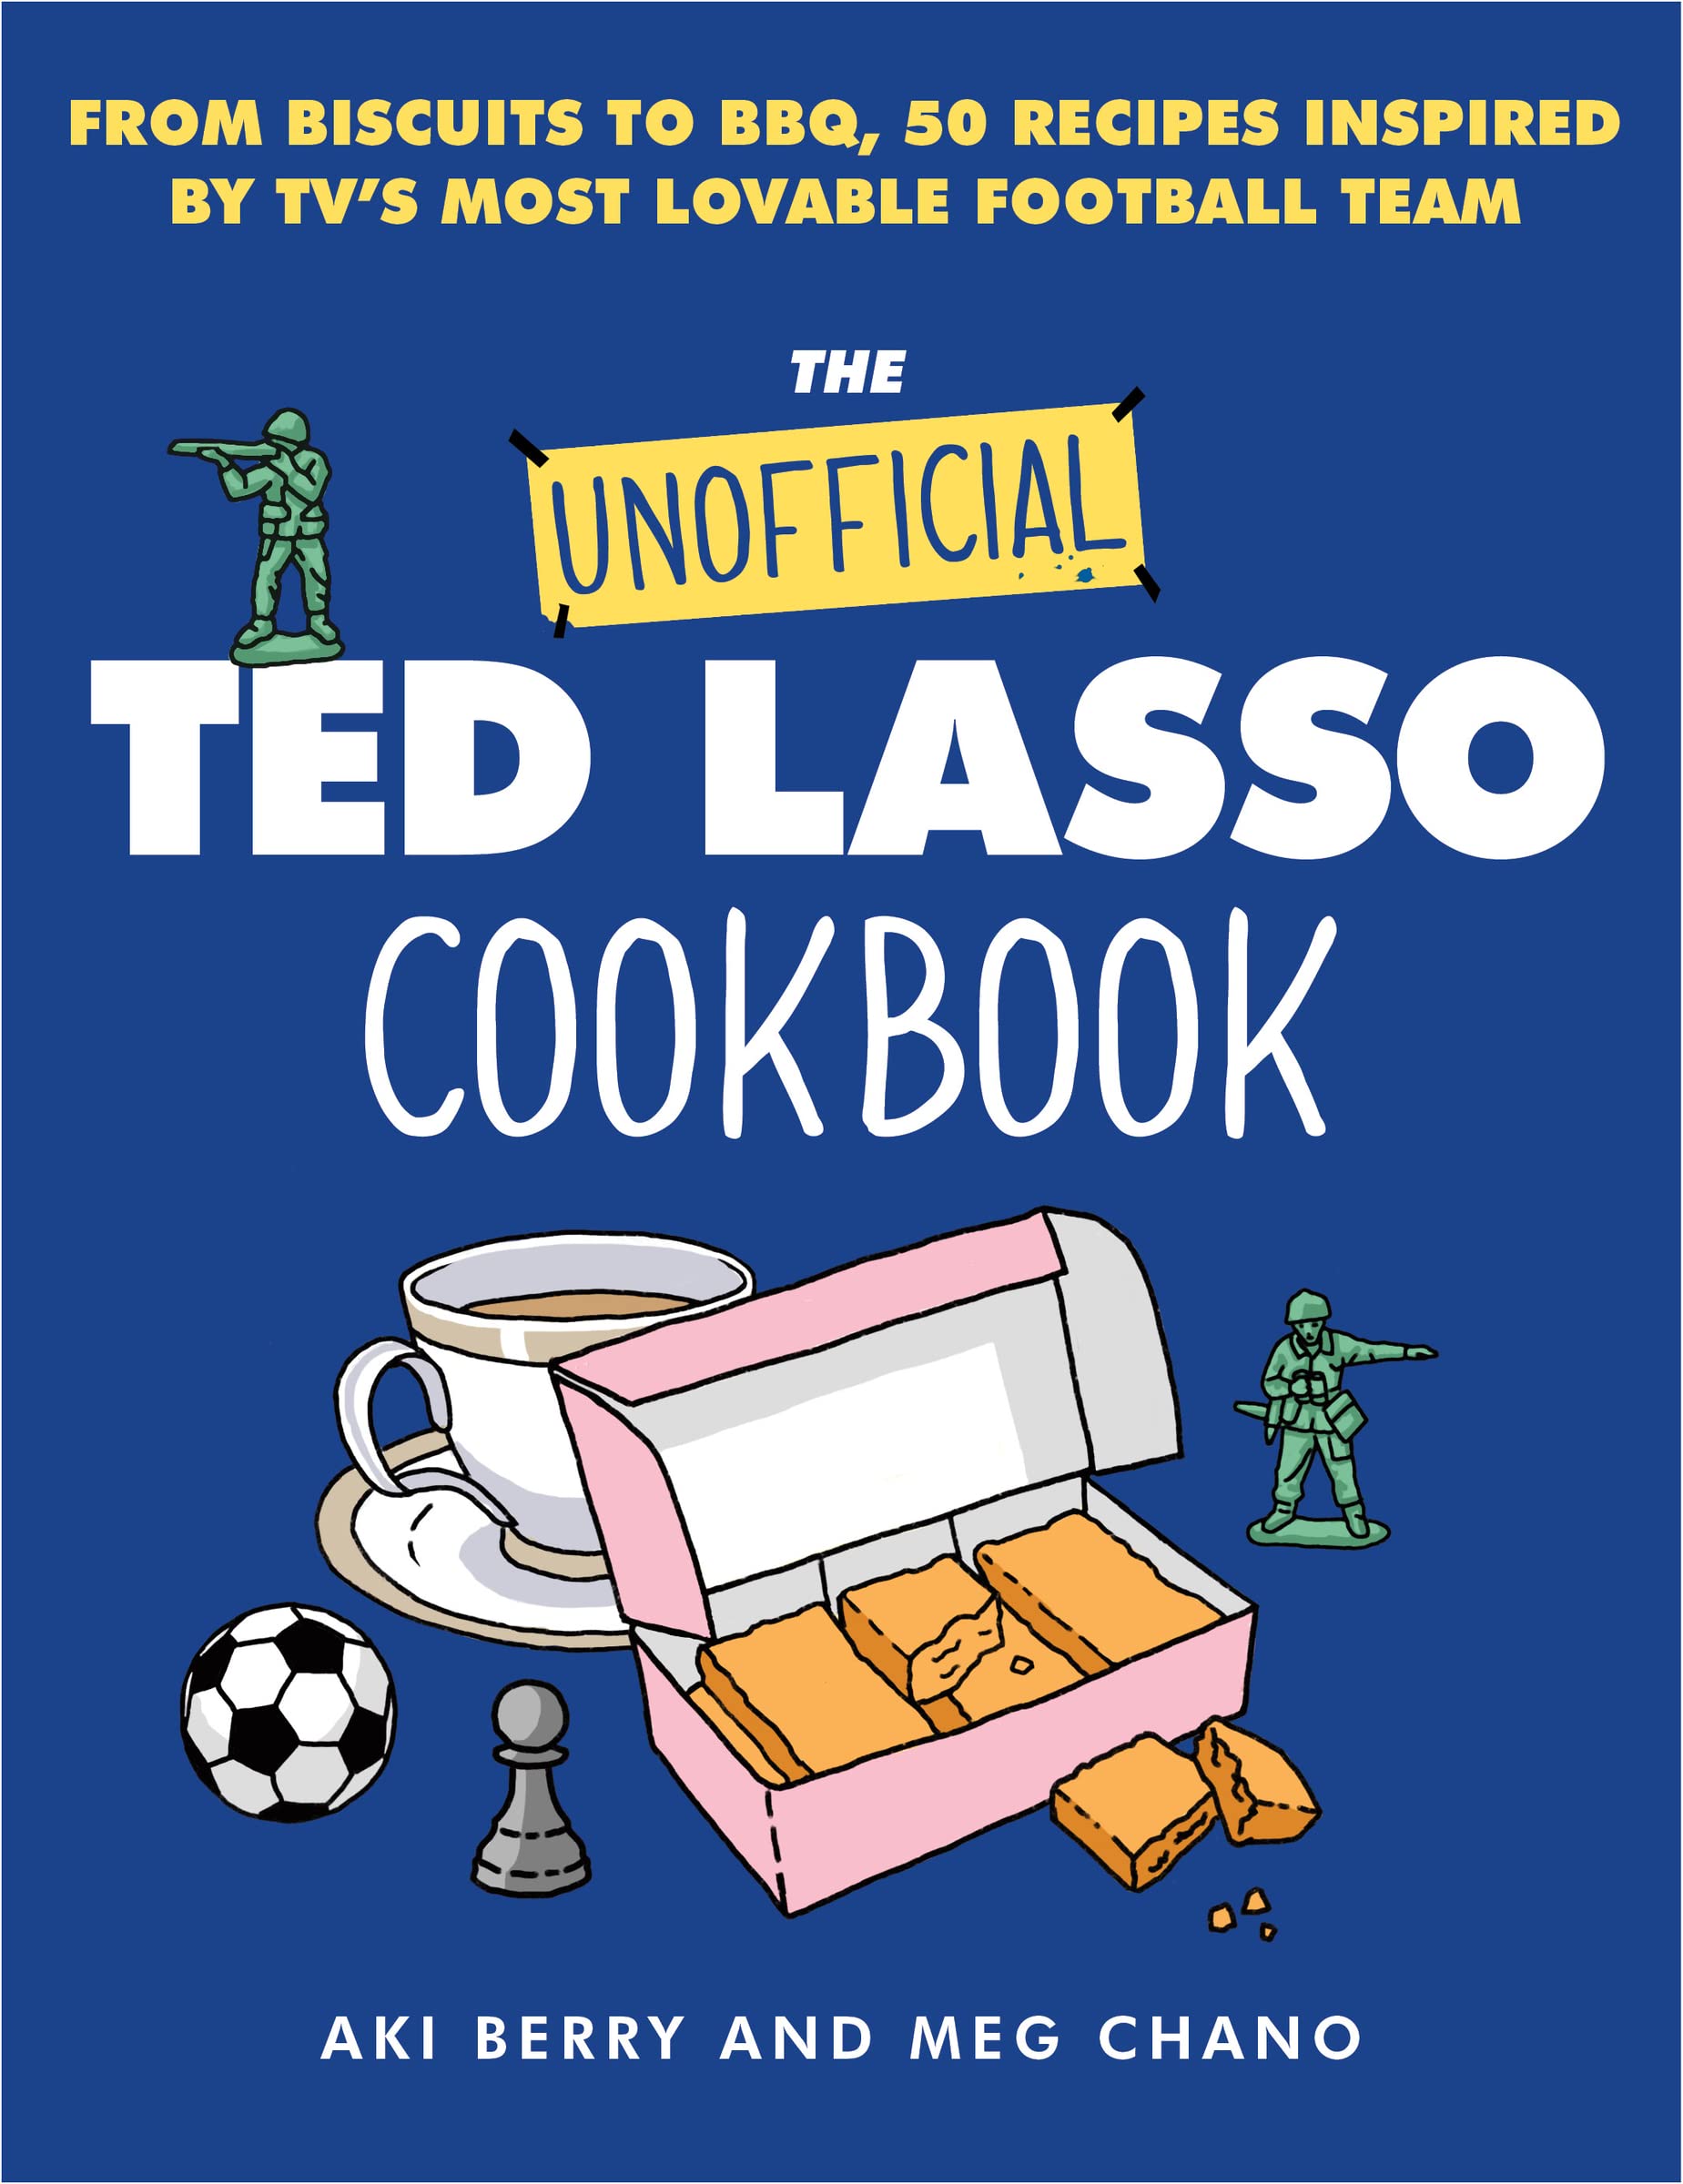 The Unofficial Ted Lasso Cookbook: From Biscuits to BBQ, 50 Recipes Inspired by TV's Most Lovable Football Team (Aki Berry, Meg Chano) *Signed*